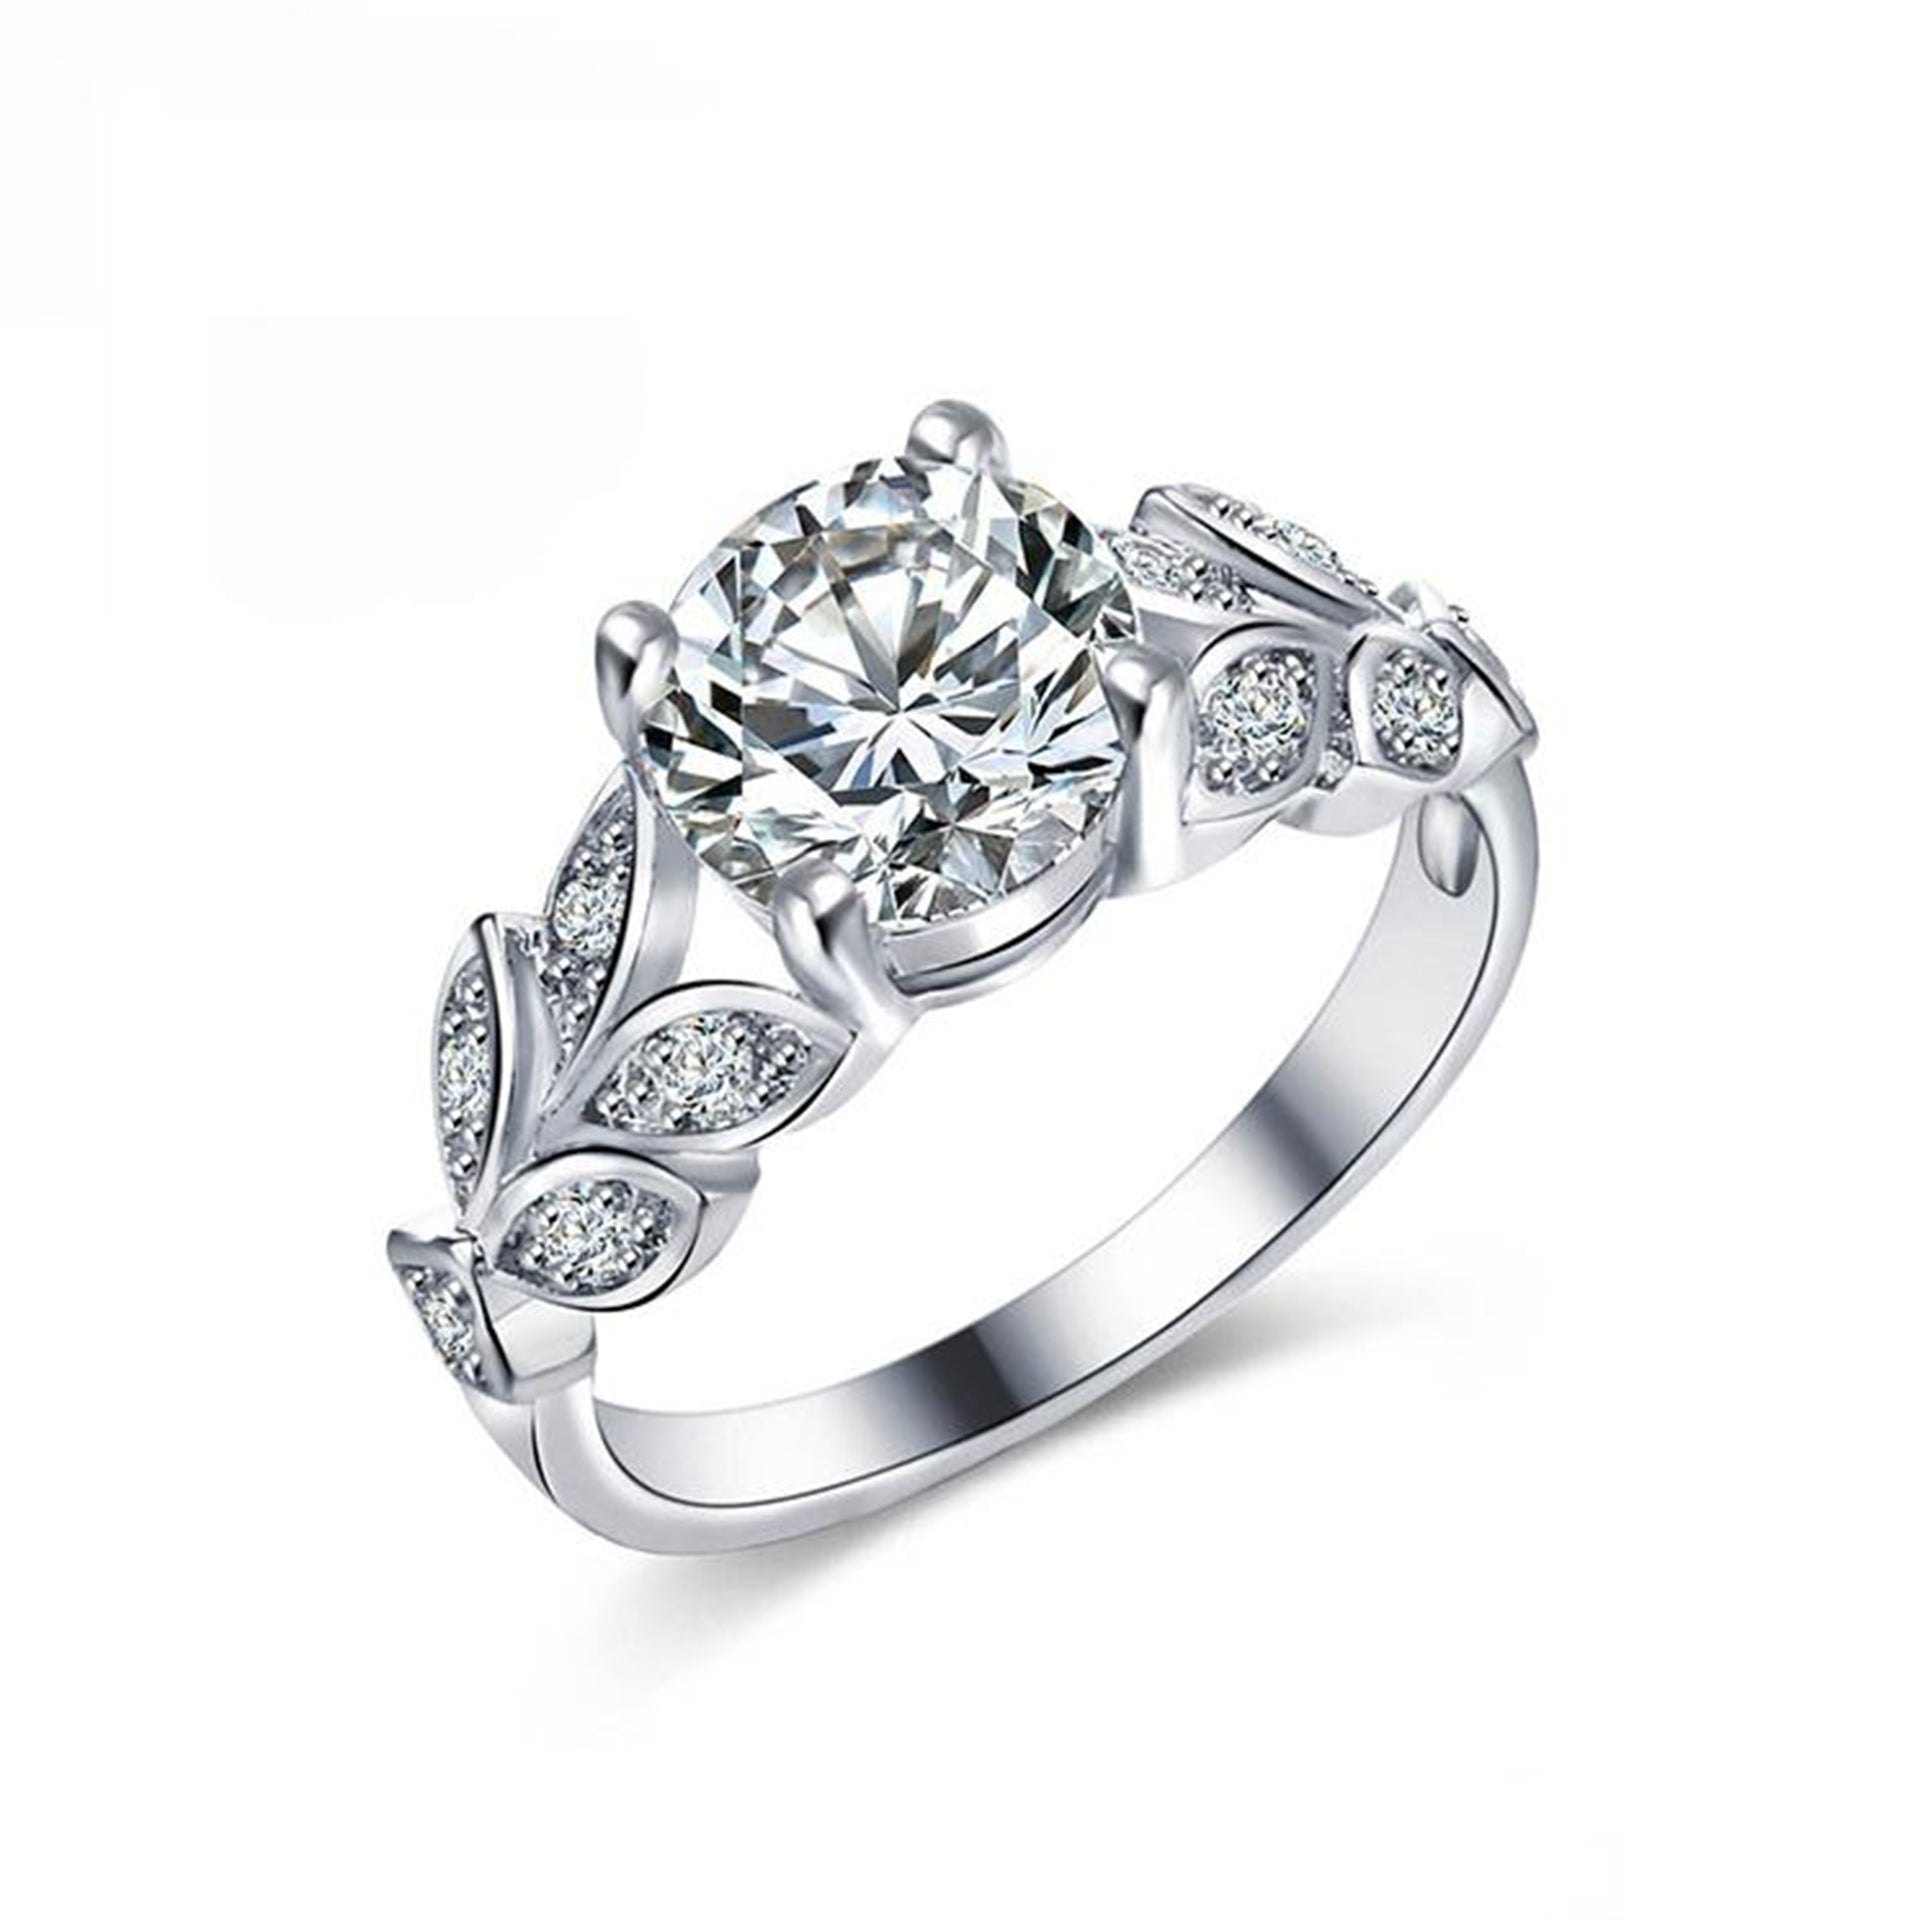 the meadow engagement ring in silver